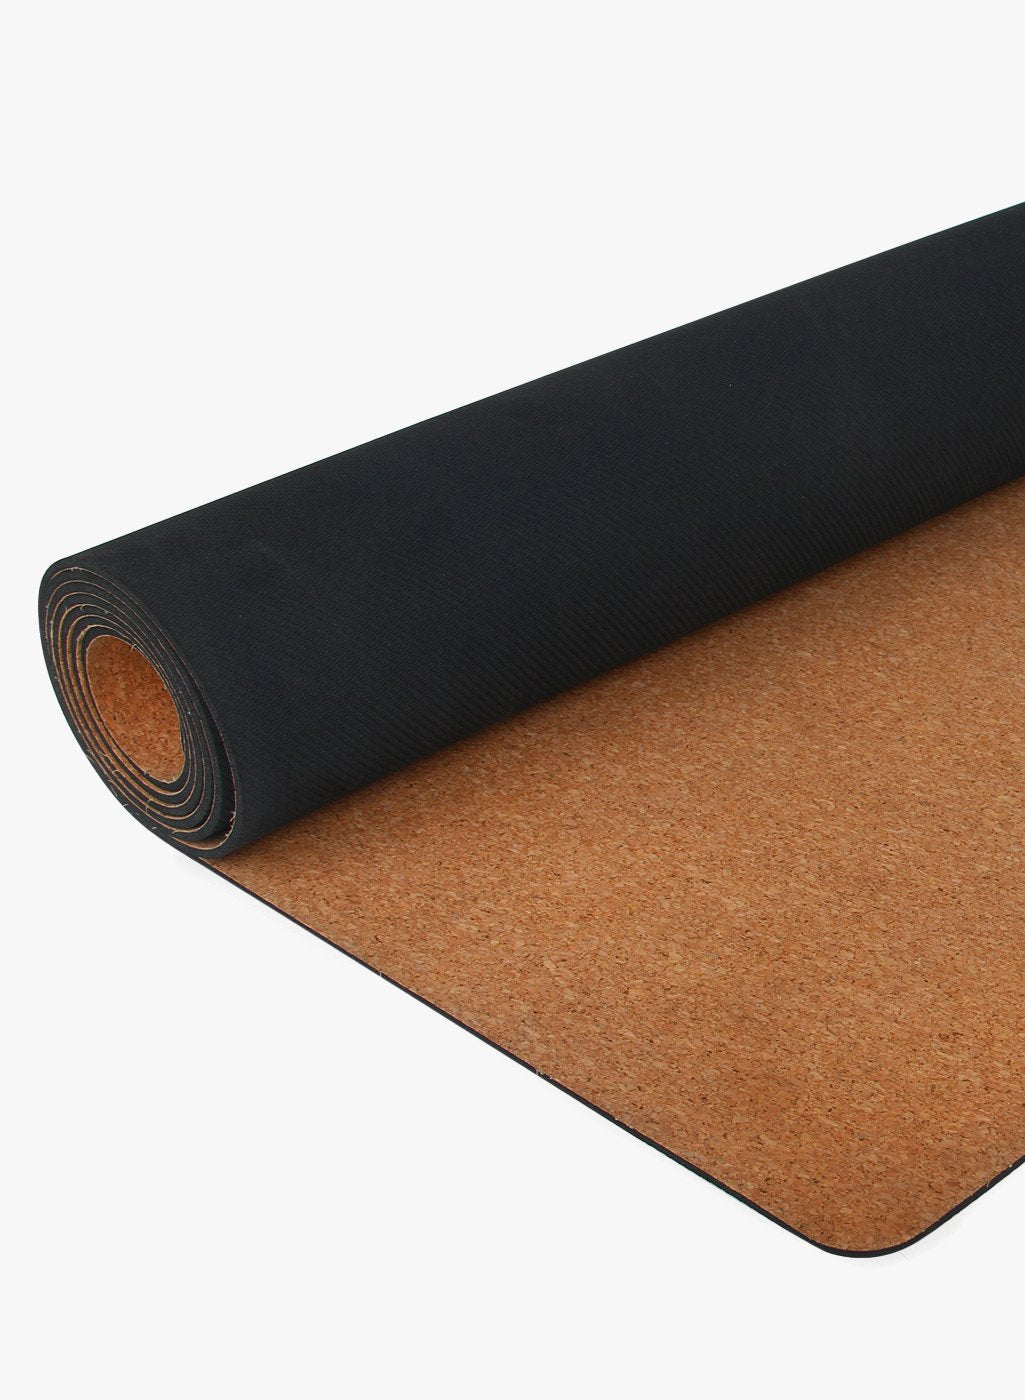 Shakti Warrior Peacock Design Cork Yoga Mat - A fusion of art and functionality. Best for yoga enthusiasts, offering superior grip, non-slip performance, and the perfect thickness for a comfortable workout